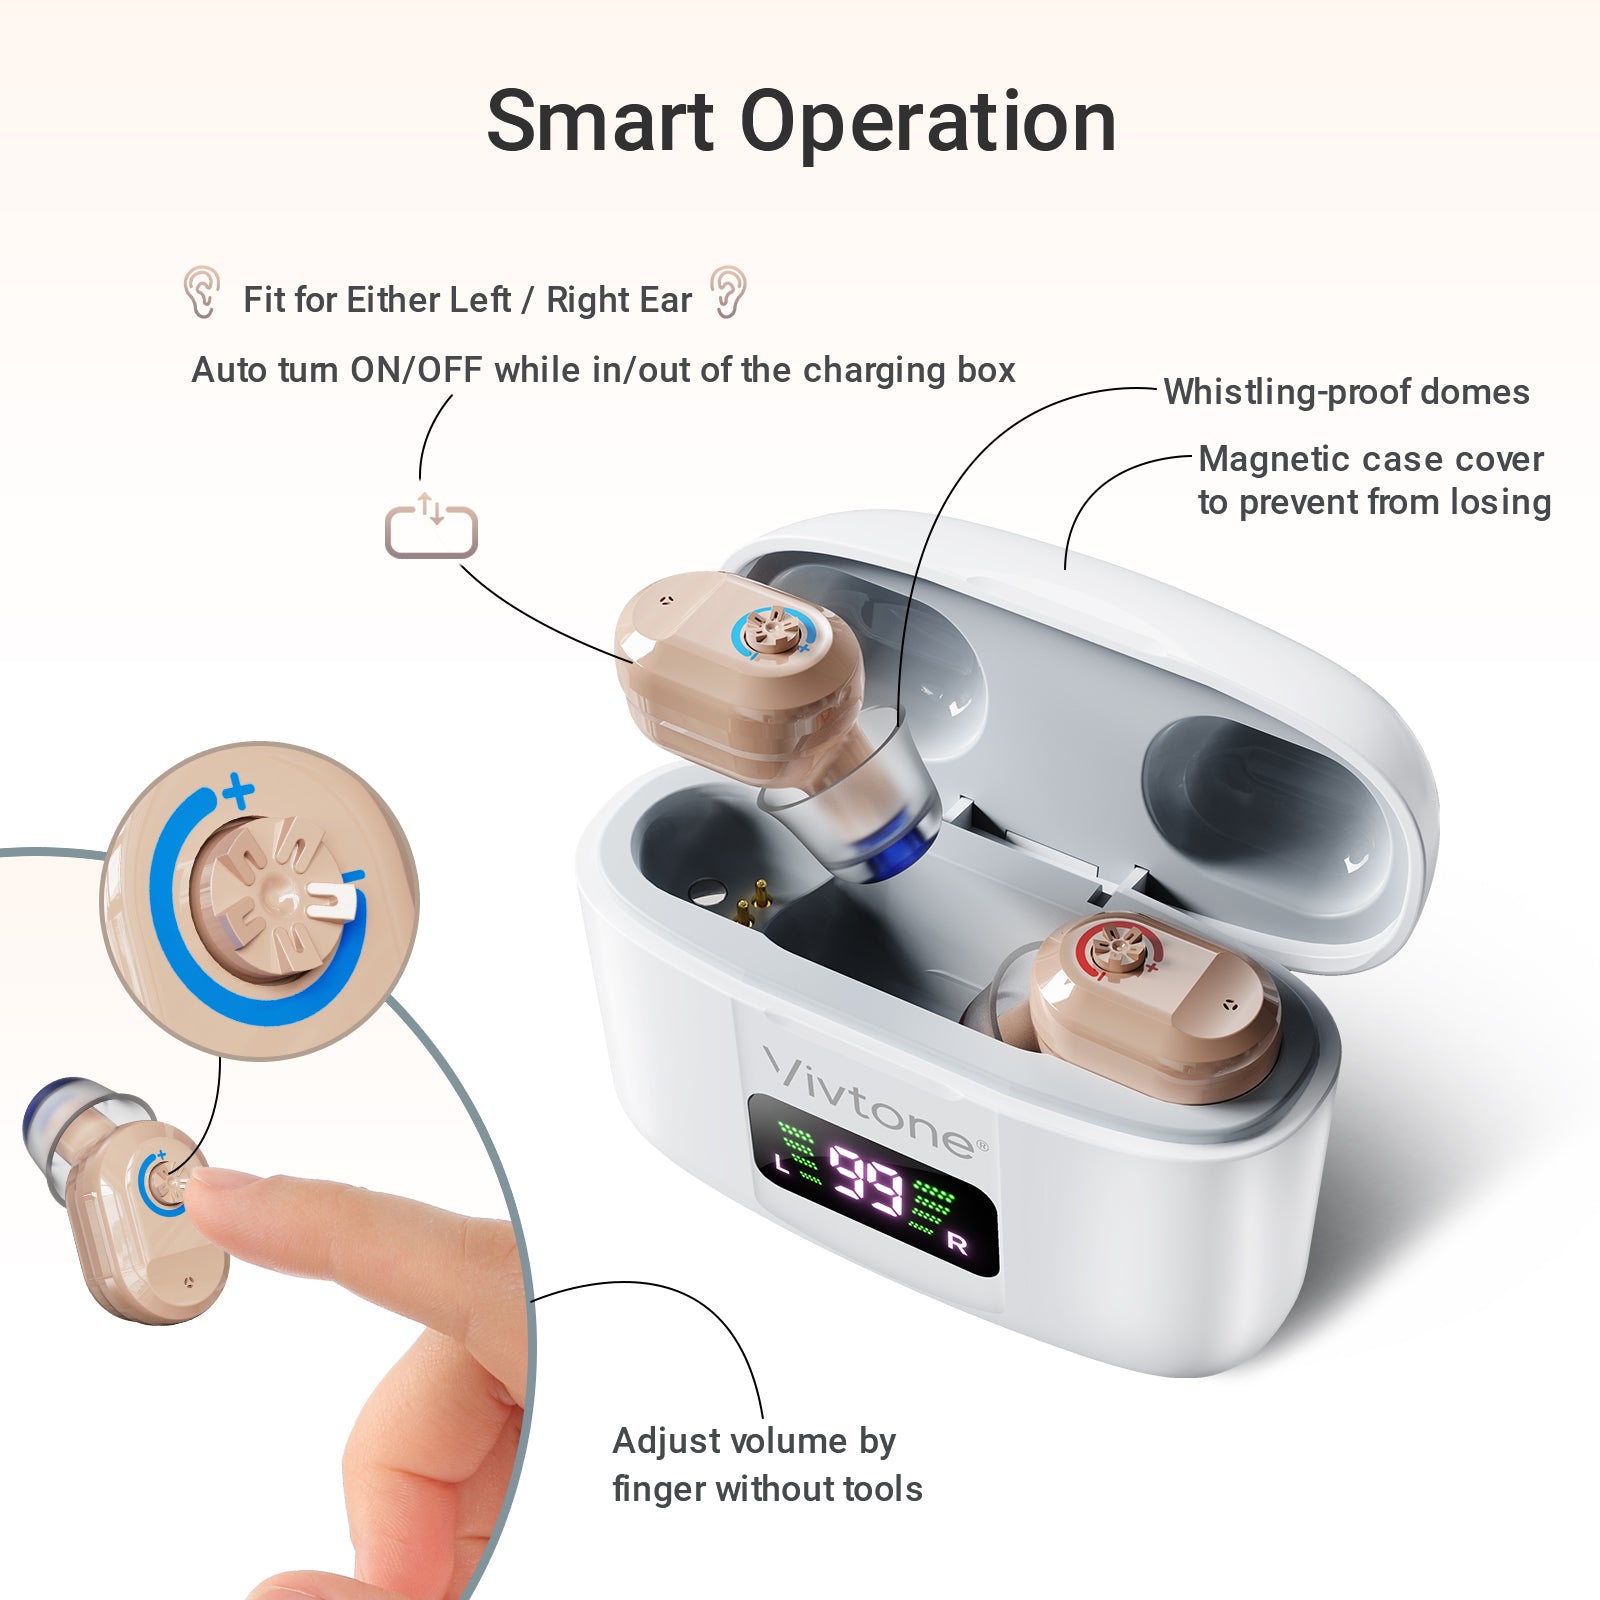 rechargeable cic hearing aids